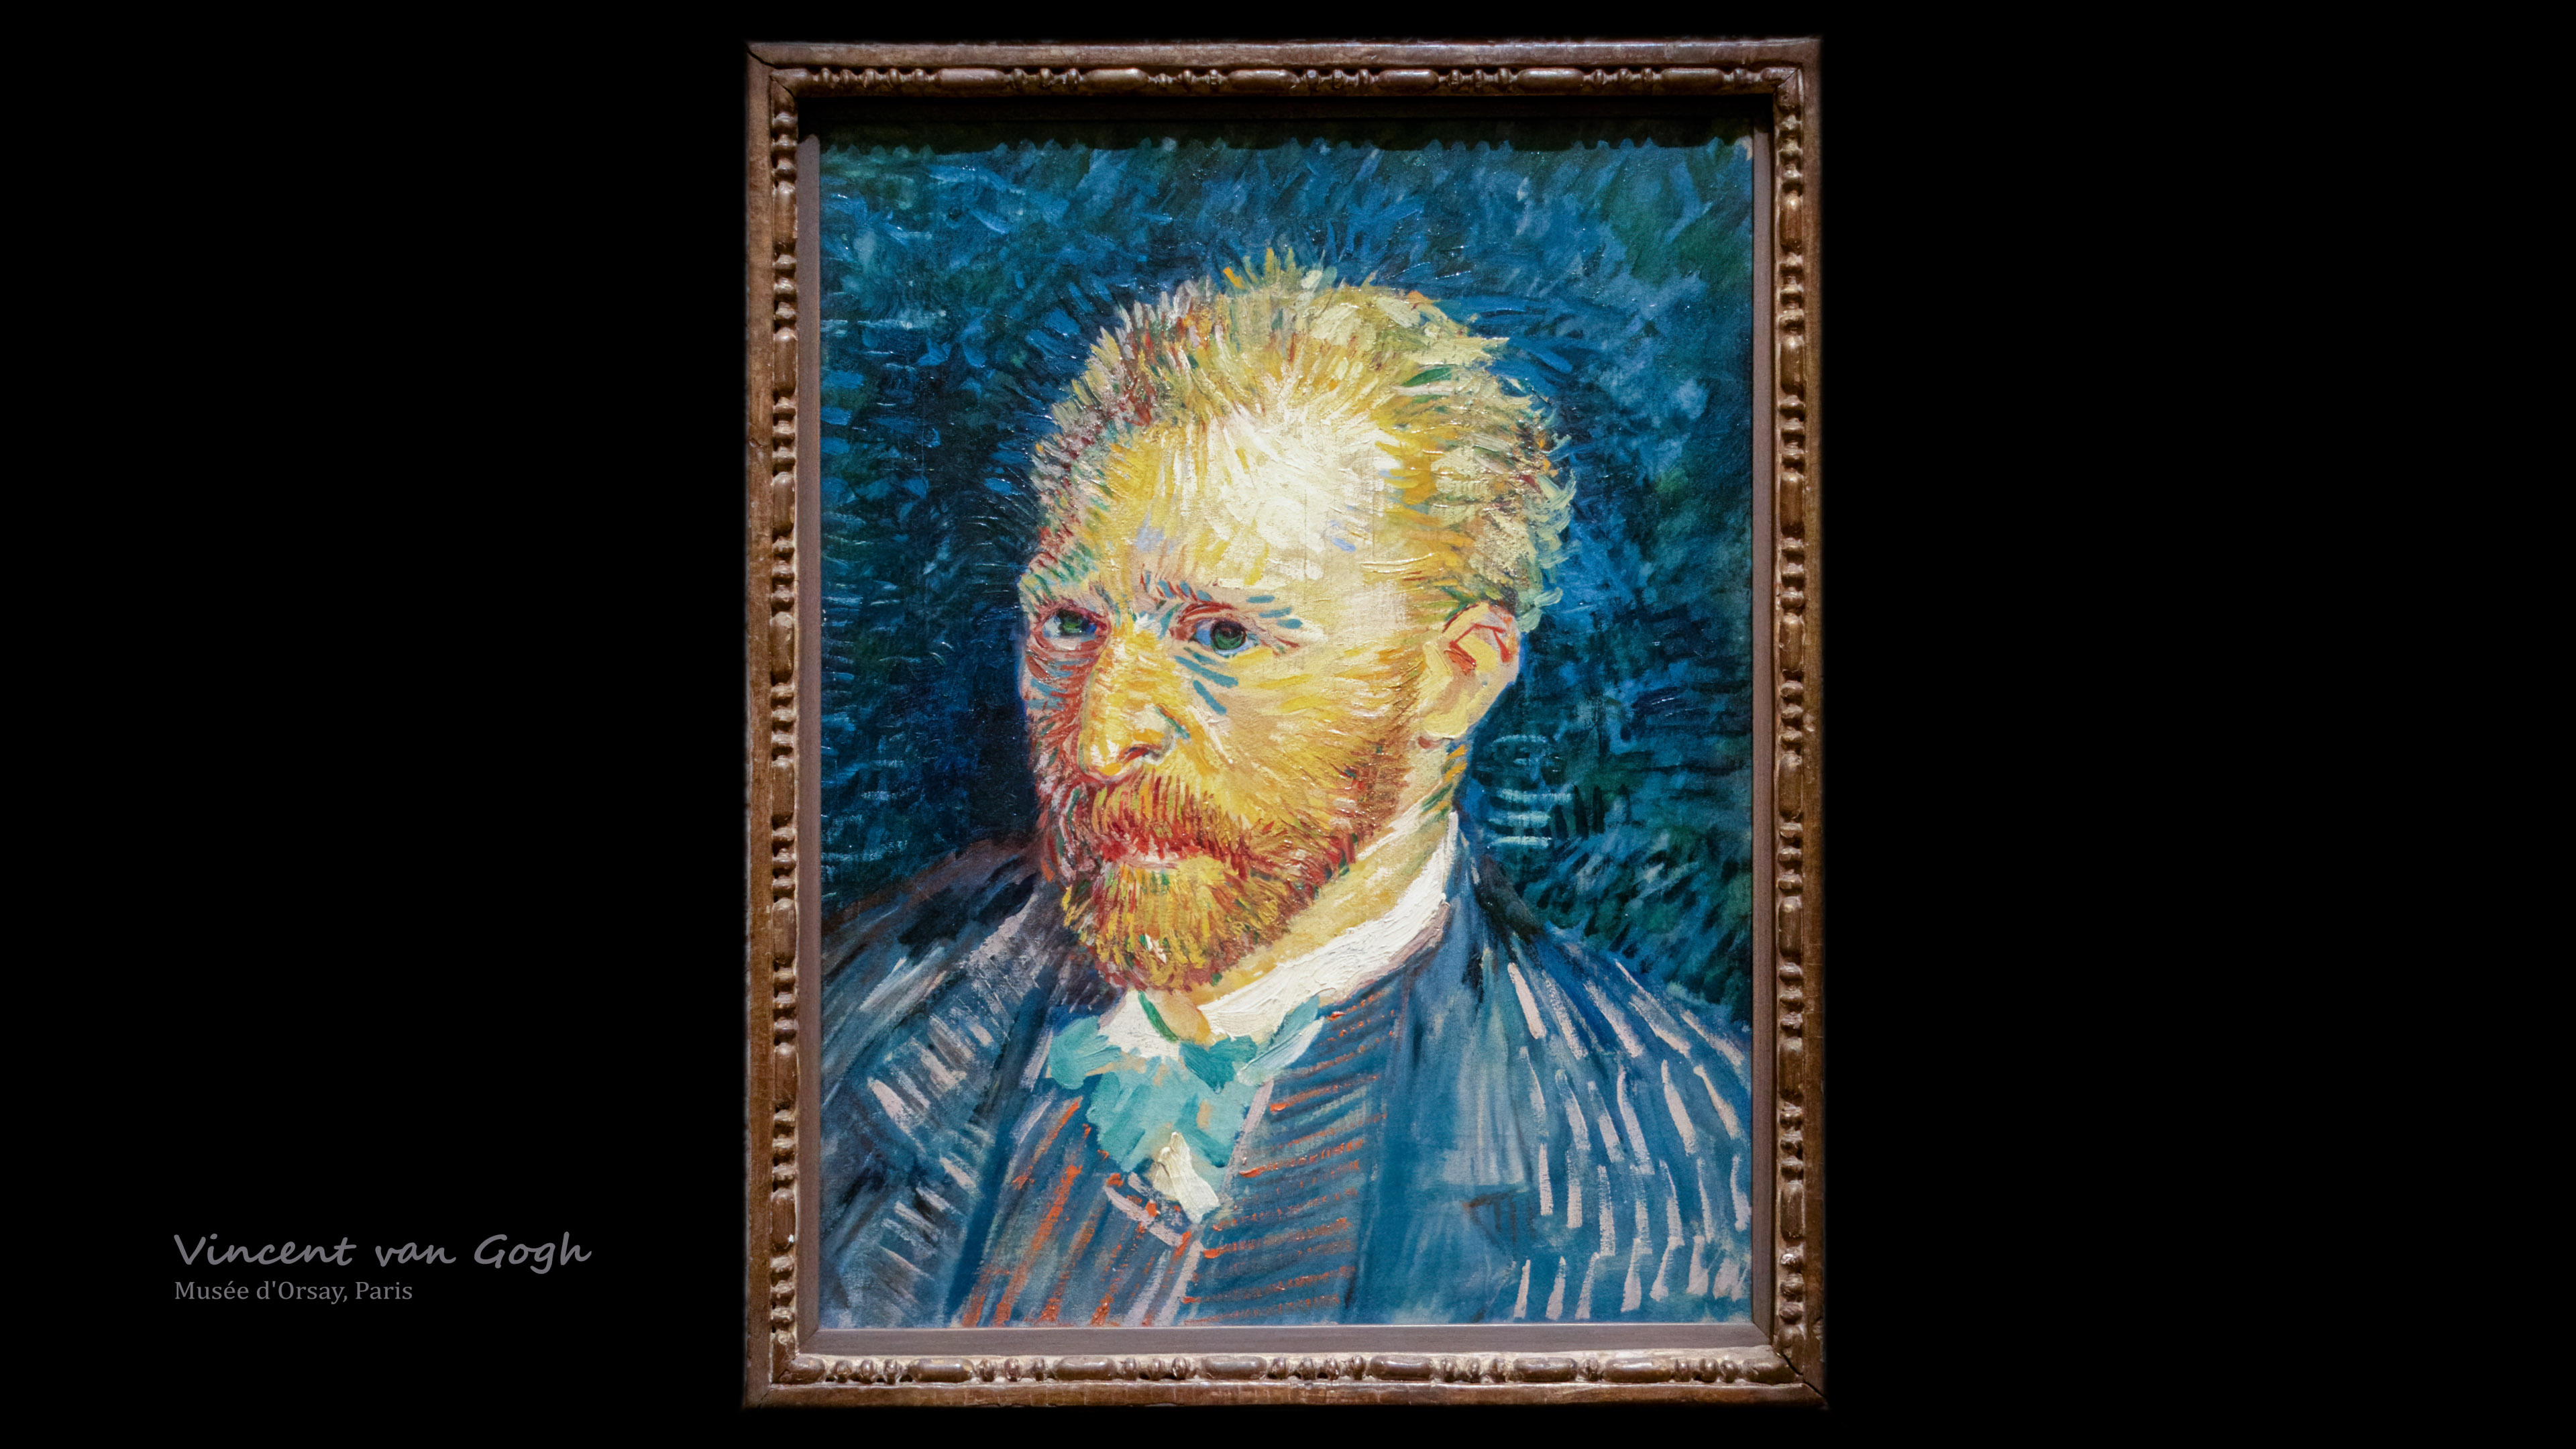 Explore the depth of Van Gogh's emotions with a self-portrait wallpaper in 4K that captures the artist's introspective gaze and intensity.